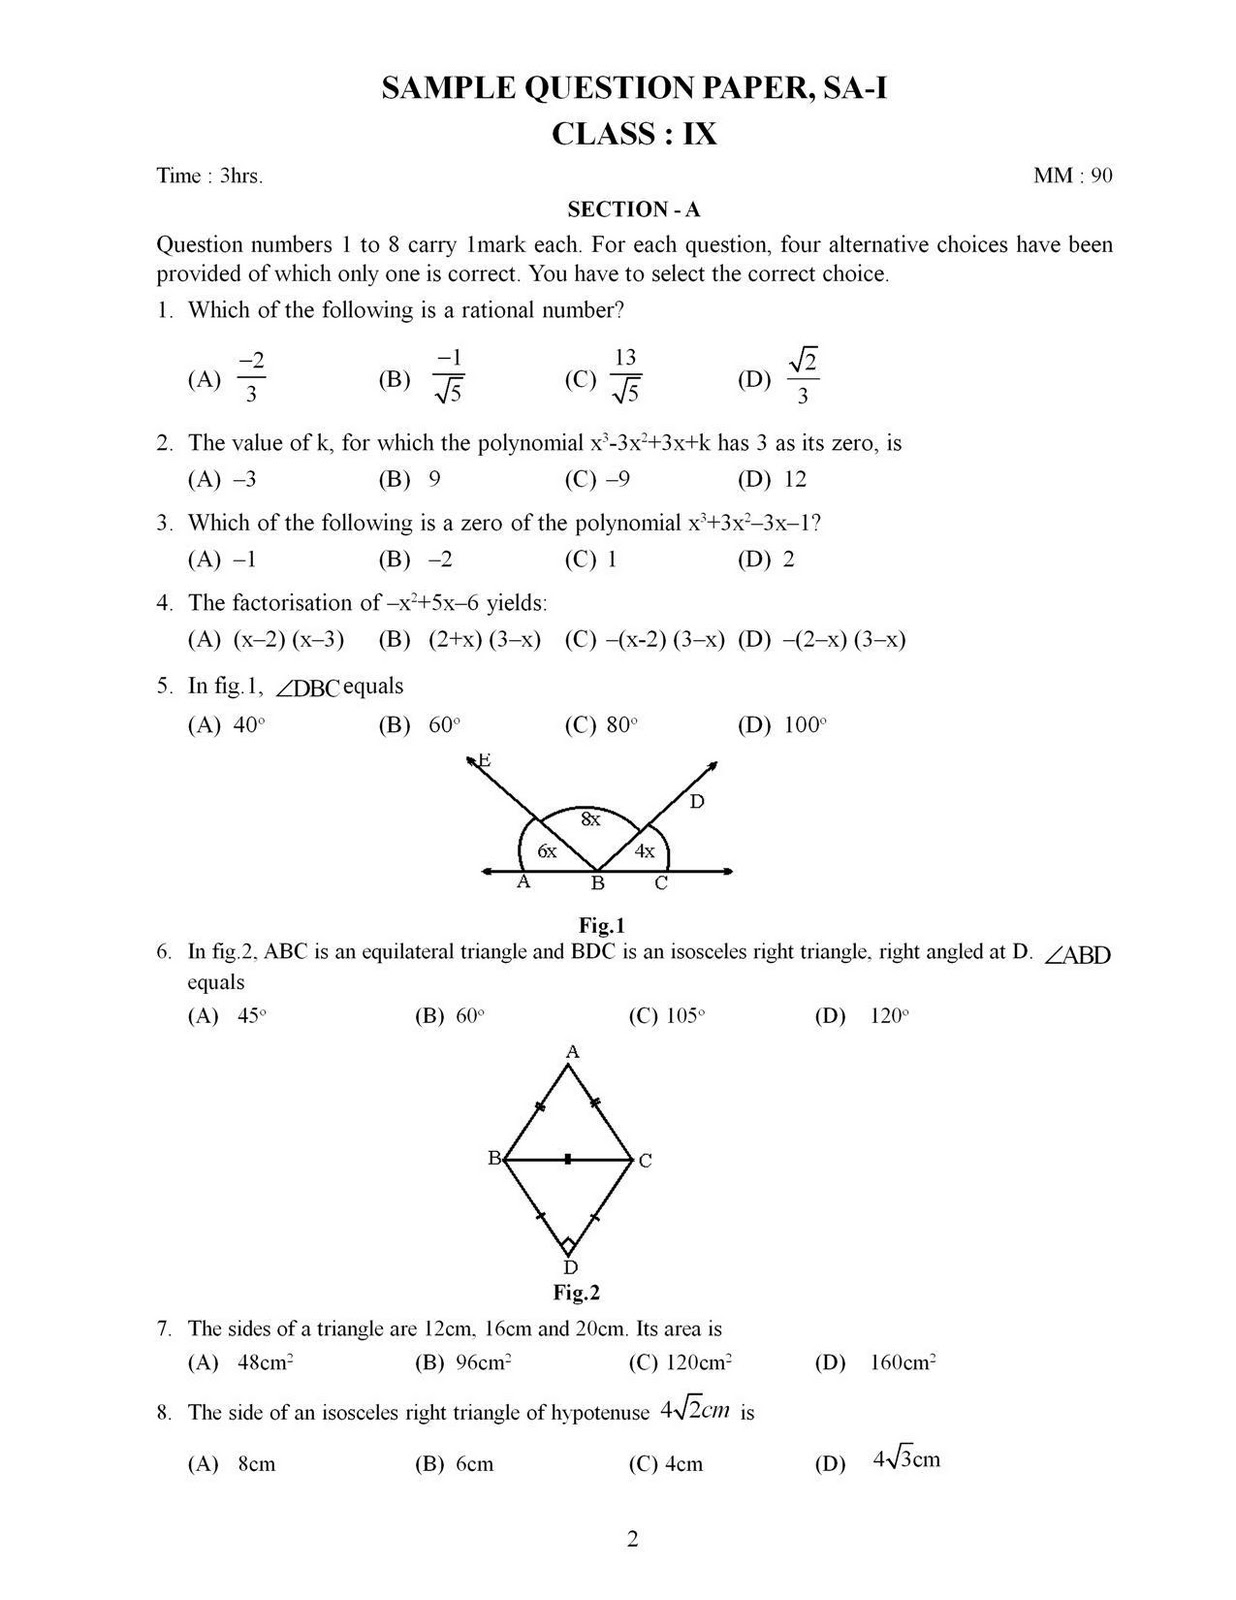 CBSE Sample Papers for Class 9 Maths - Learn CBSE